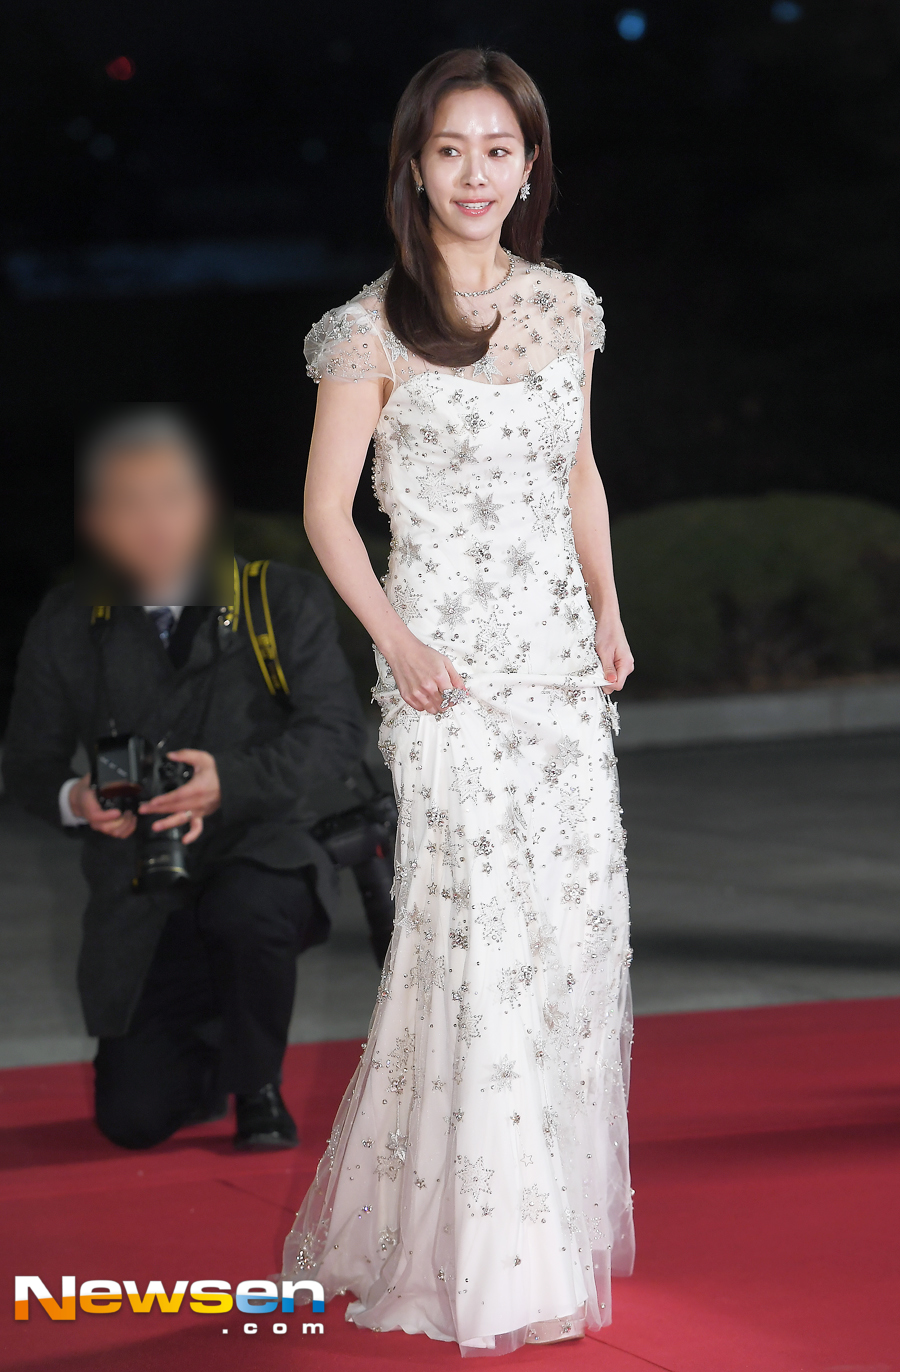 Red Carpet and Photo Wall, the 39th Blue Dragon Film Awards, were held at the Hall of Peace at Kyunghee University in Hoegi-dong, Seoul Dongdaemun District, on the afternoon of November 23.Han Ji-min attended the day.List of winners (writing) of the 39th Blue Dragon Film Awards▲ Best Picture Award = (1987)▲ Actor in the South: Kim Yoon-seok (1987)▲ Best Actress Award = Han Ji-min (Miss Back)▲ Director Award: Yoon Jong-bin (Director)▲ Best Supporting Actor = The Late Kim Joo-hyuk (Believer)▲ Supporting Actress Award = Kim Hyang Gi (with God)▲ New South Korean Idol = Nam Joo-hyuk (Anshi-sung)▲ New Actress = Kim Dae-mi (Witch)▲ New Director Award: Jeon Go-un (Small and Little Girl)▲ The Most Audience Award (with God - Sin and Punishment)▲ Chung Jung-won Popular Star Award: Joo Ji-hoon (Jok, with God, with Murder), Kim Young-kwang (your wedding) Kim Hyang Gi (with God) Jin Seo-yeon (Believer)▲ Chung Jung Won Short Film Award = Huh Ji Eun Lee Kyung Ho (New Record)▲ Screenplay: Kwak Kyung-taek Kim Tae-gyun (Murder)▲ Art Prize: Park Il-hyun (Principal)▲ Music Award: Believer▲ Shooting Lighting Award - Kim Seung-kyu Kim Woo-hyung (1987)▲ Editorial Prize: Kim Hyung-joo Jung Bum-sik Yang Dong-yeop (Konji Cancer)▲ Technical prize: Jin Jong-hyun (with God - sin and punishment